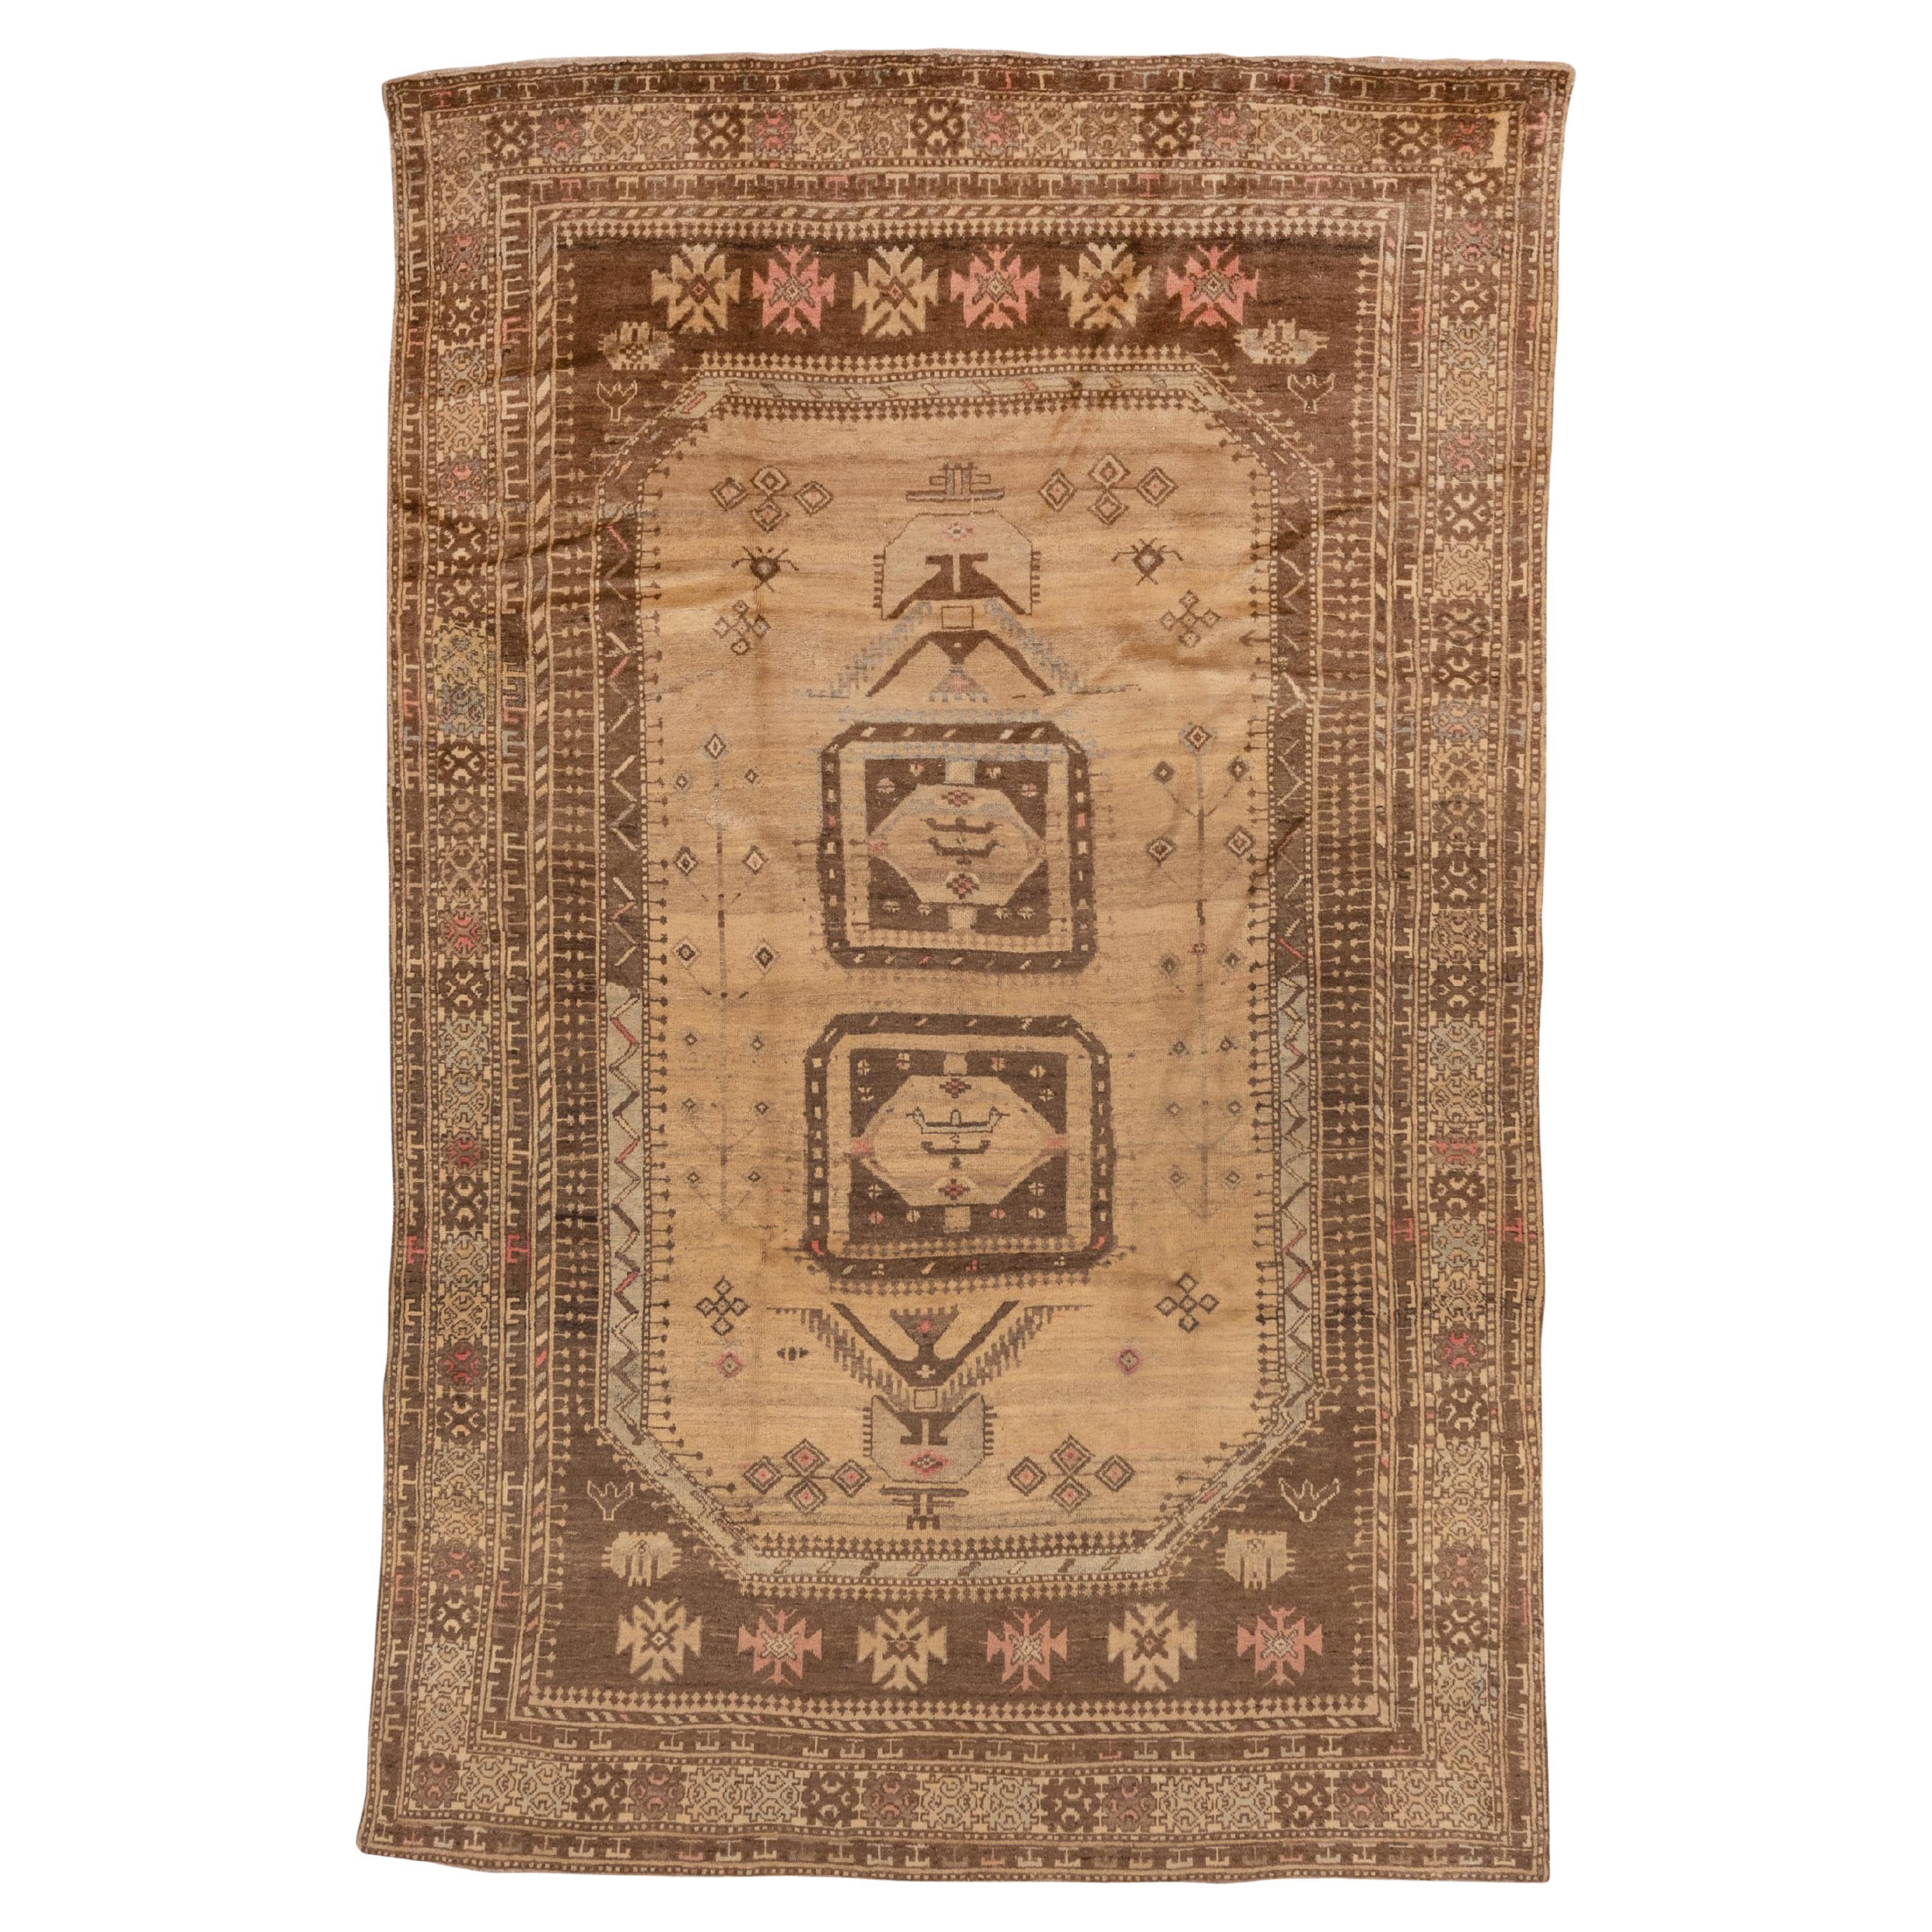 Geometric Antique Turkish Oushak Rug, Seafoam & Hot Pink Accents, Brown Palette For Sale